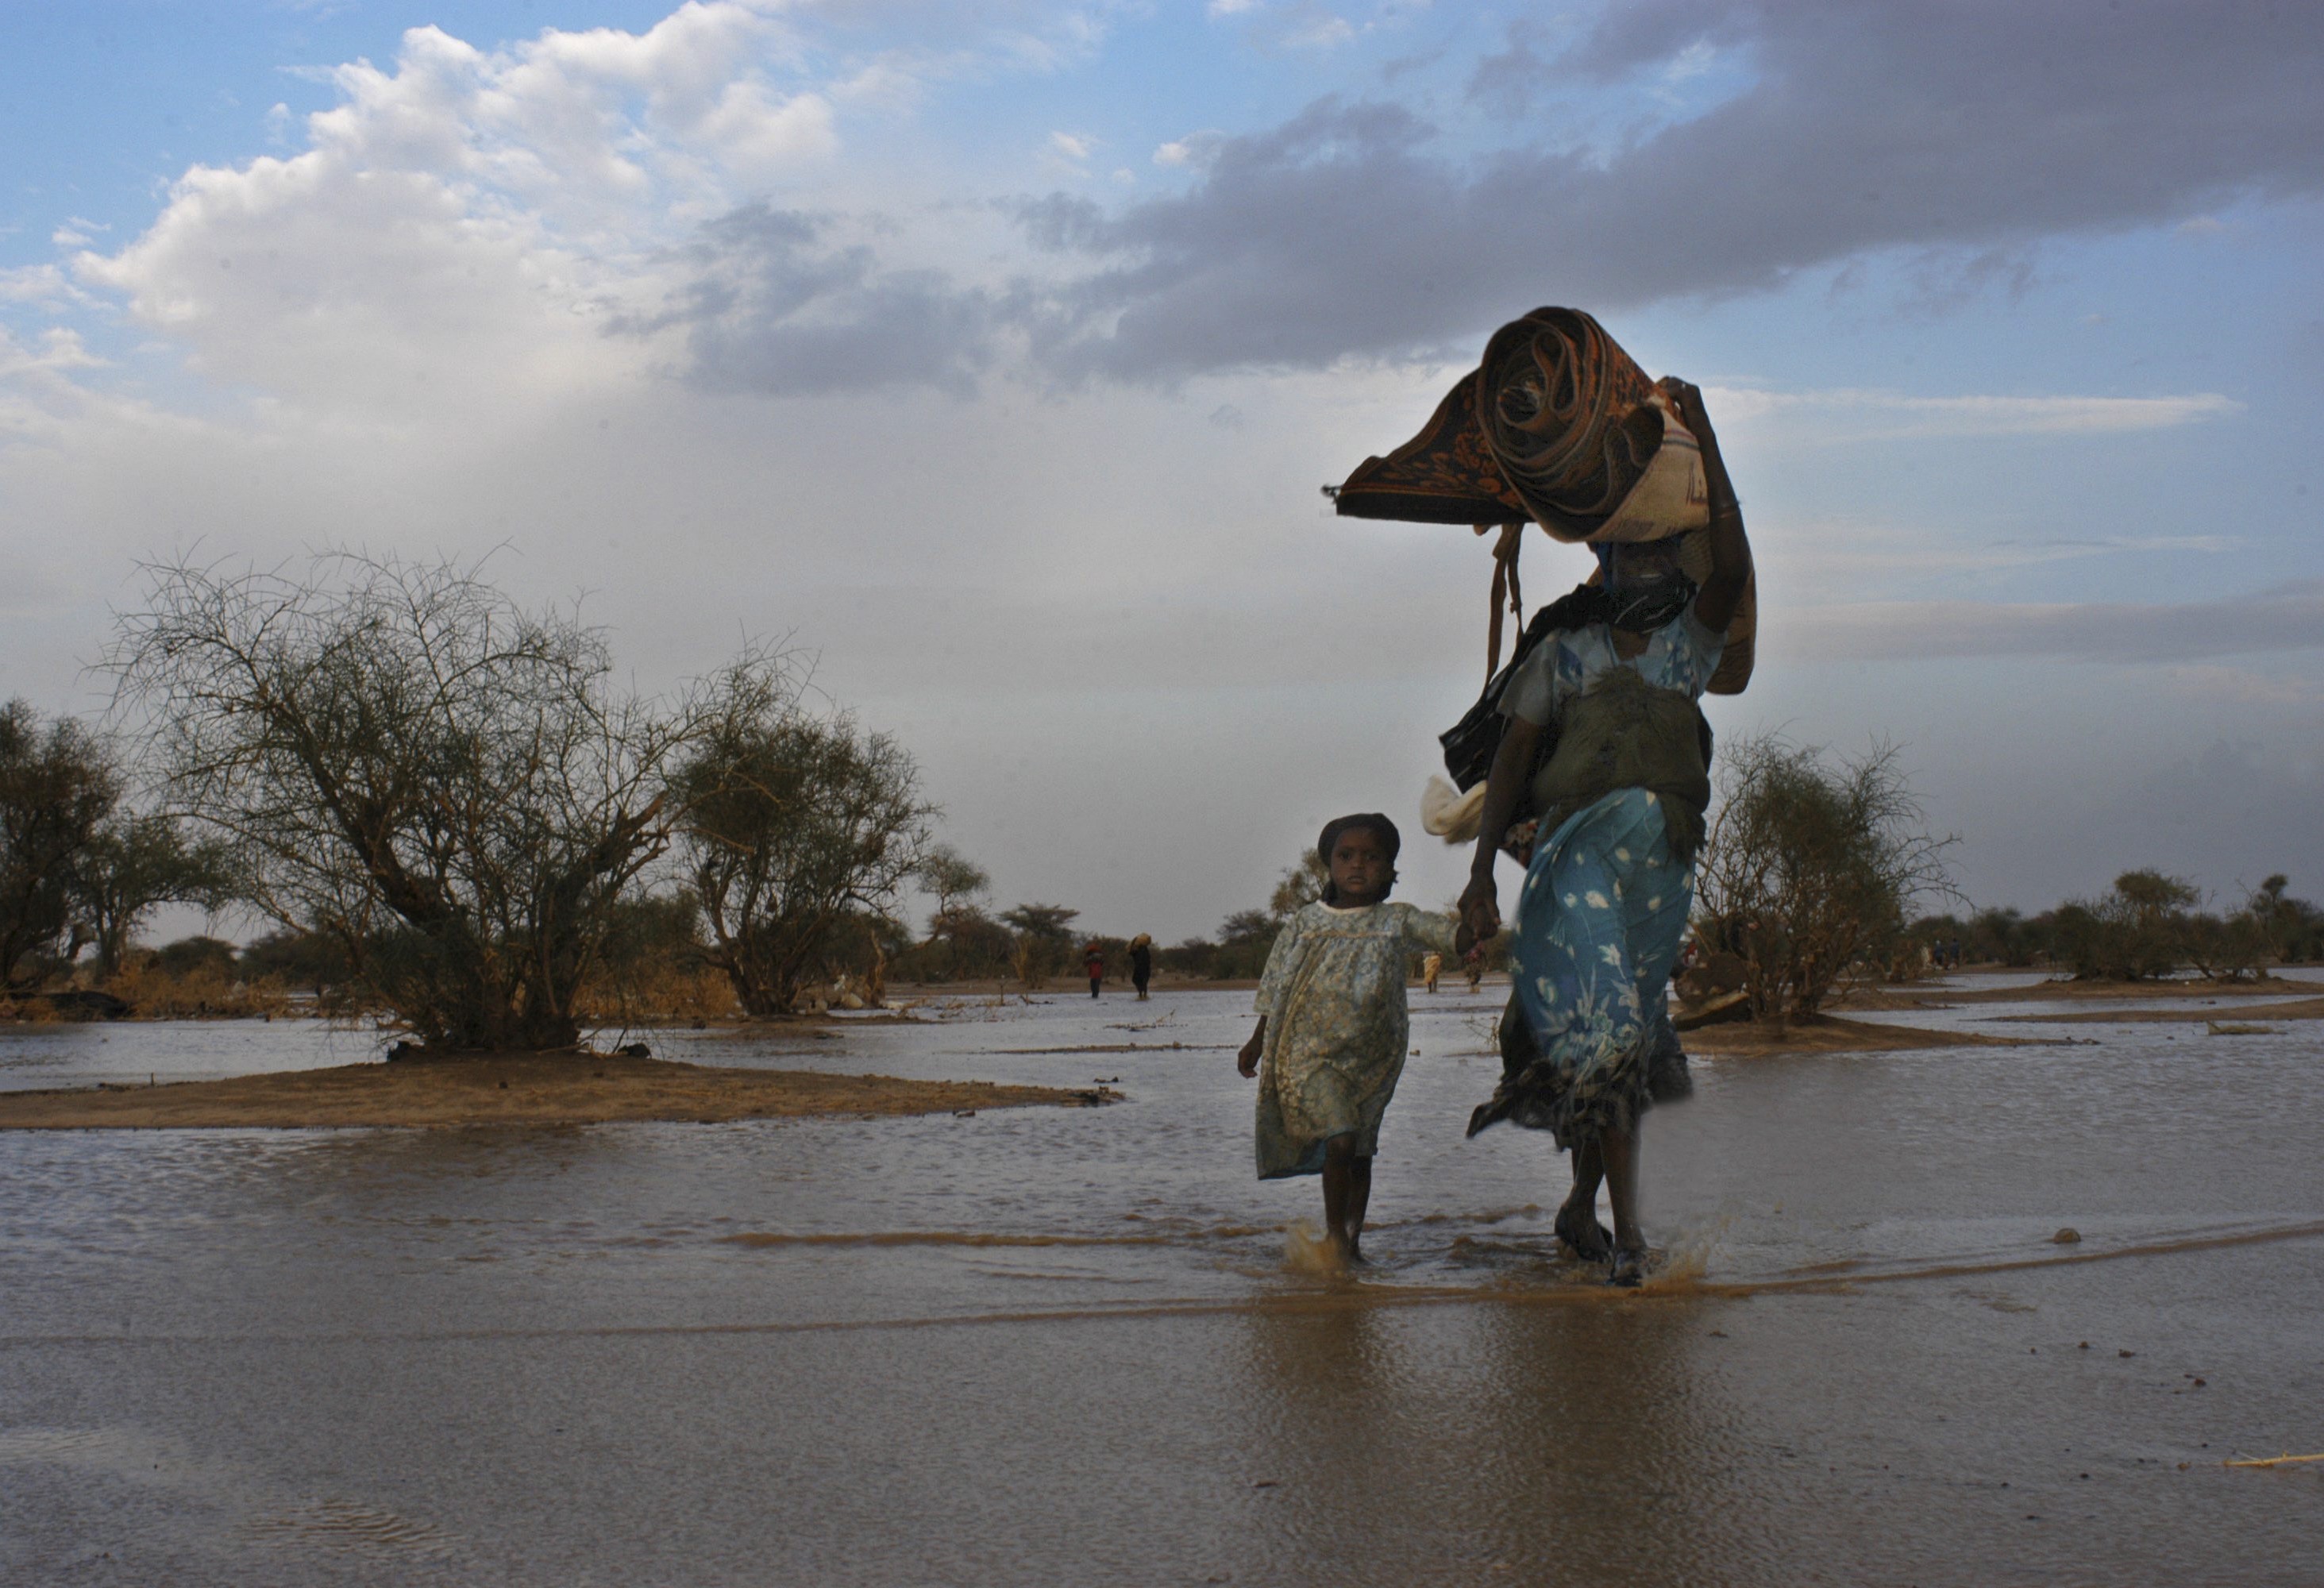 Sudanese refugees from the Darfur region looking for a new shelter in eastern Chad after heavy rains in 2004. (UNHCR/Hélène Caux)